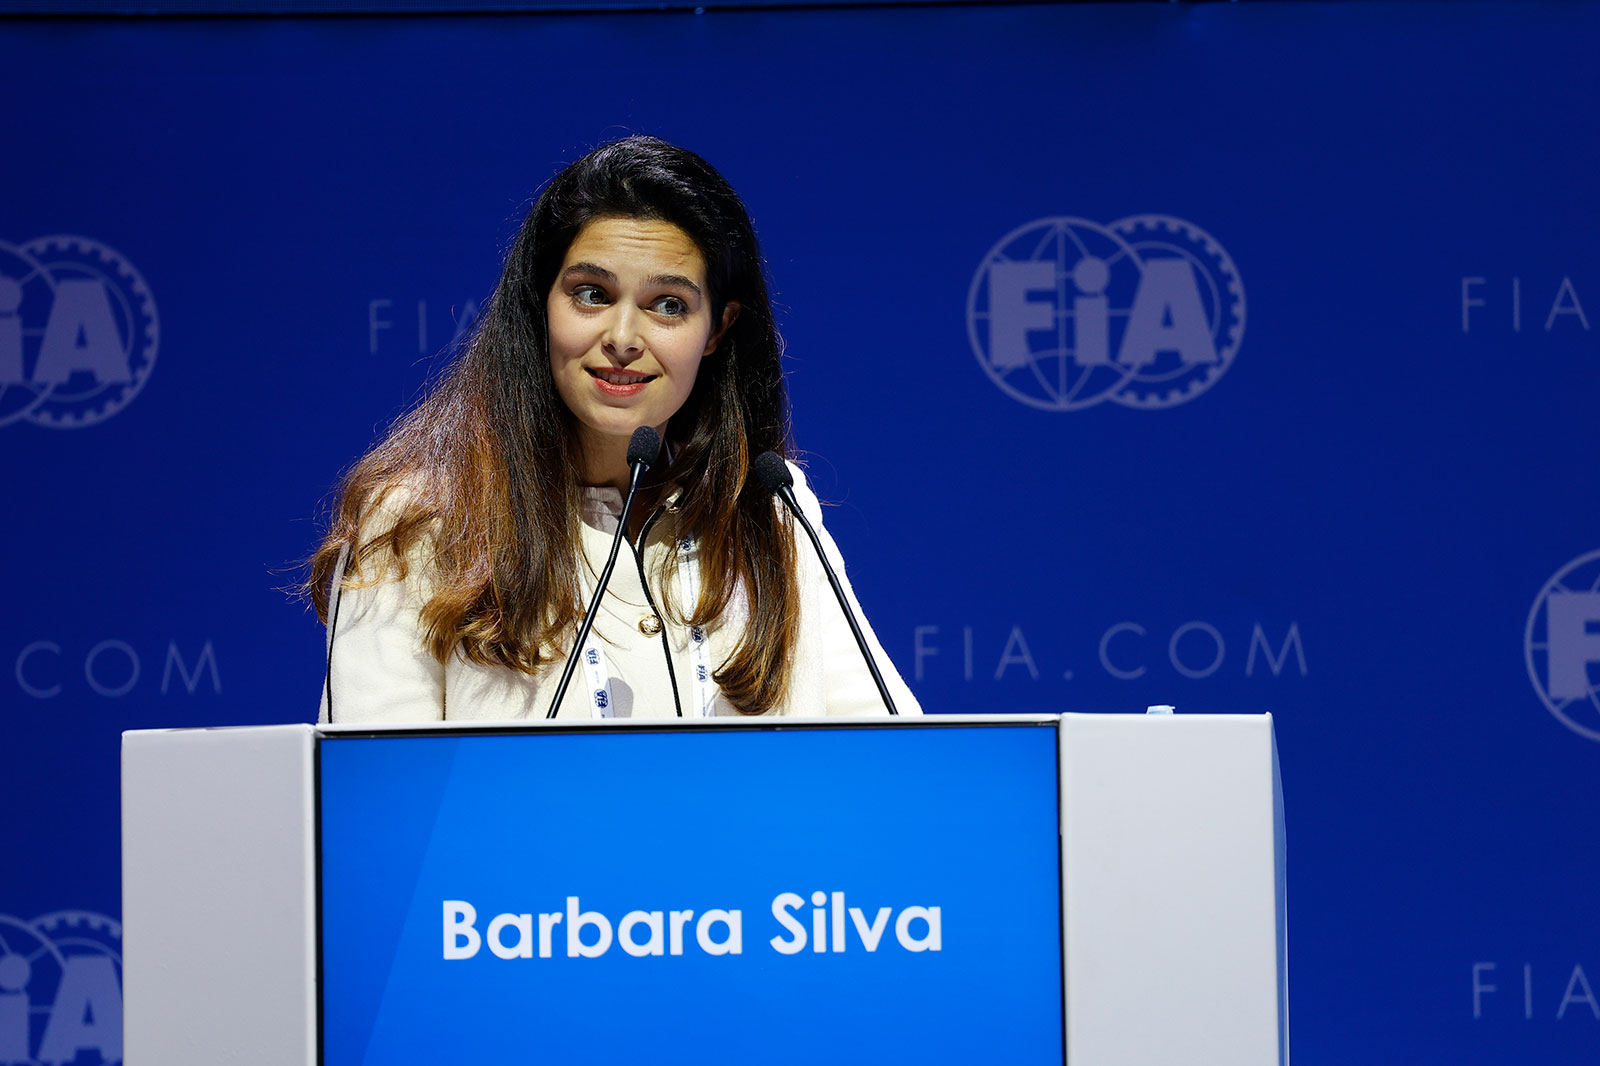 Barbara Silva, FIA Social Responsibility Manager presented details of the first global Women’s Officials Exchange Programme.